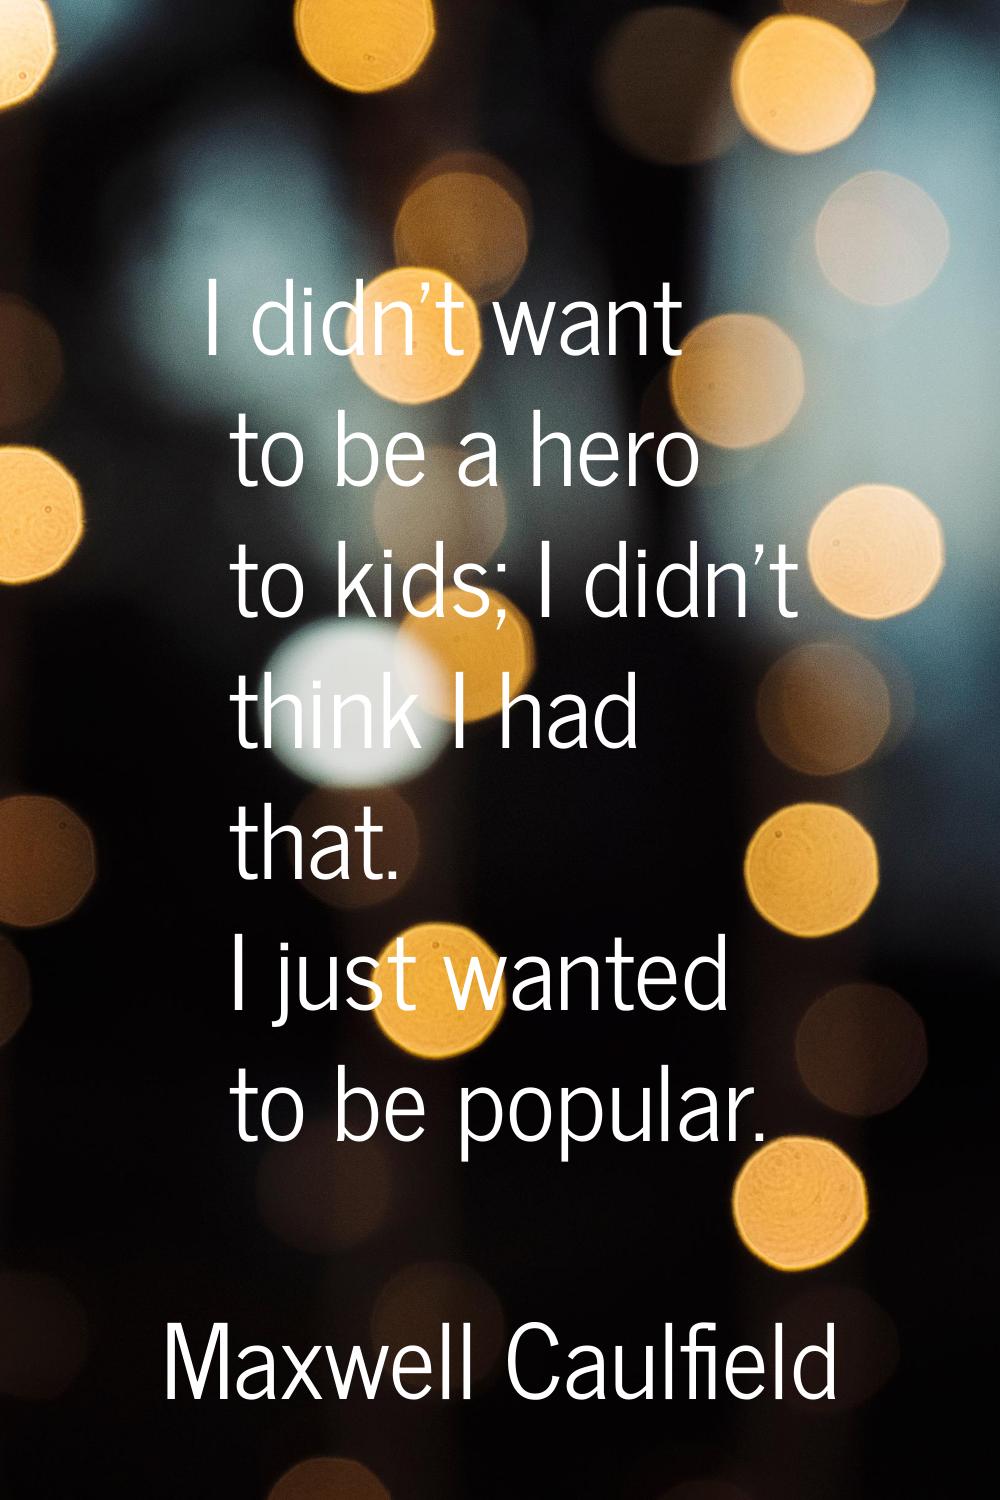 I didn't want to be a hero to kids; I didn't think I had that. I just wanted to be popular.